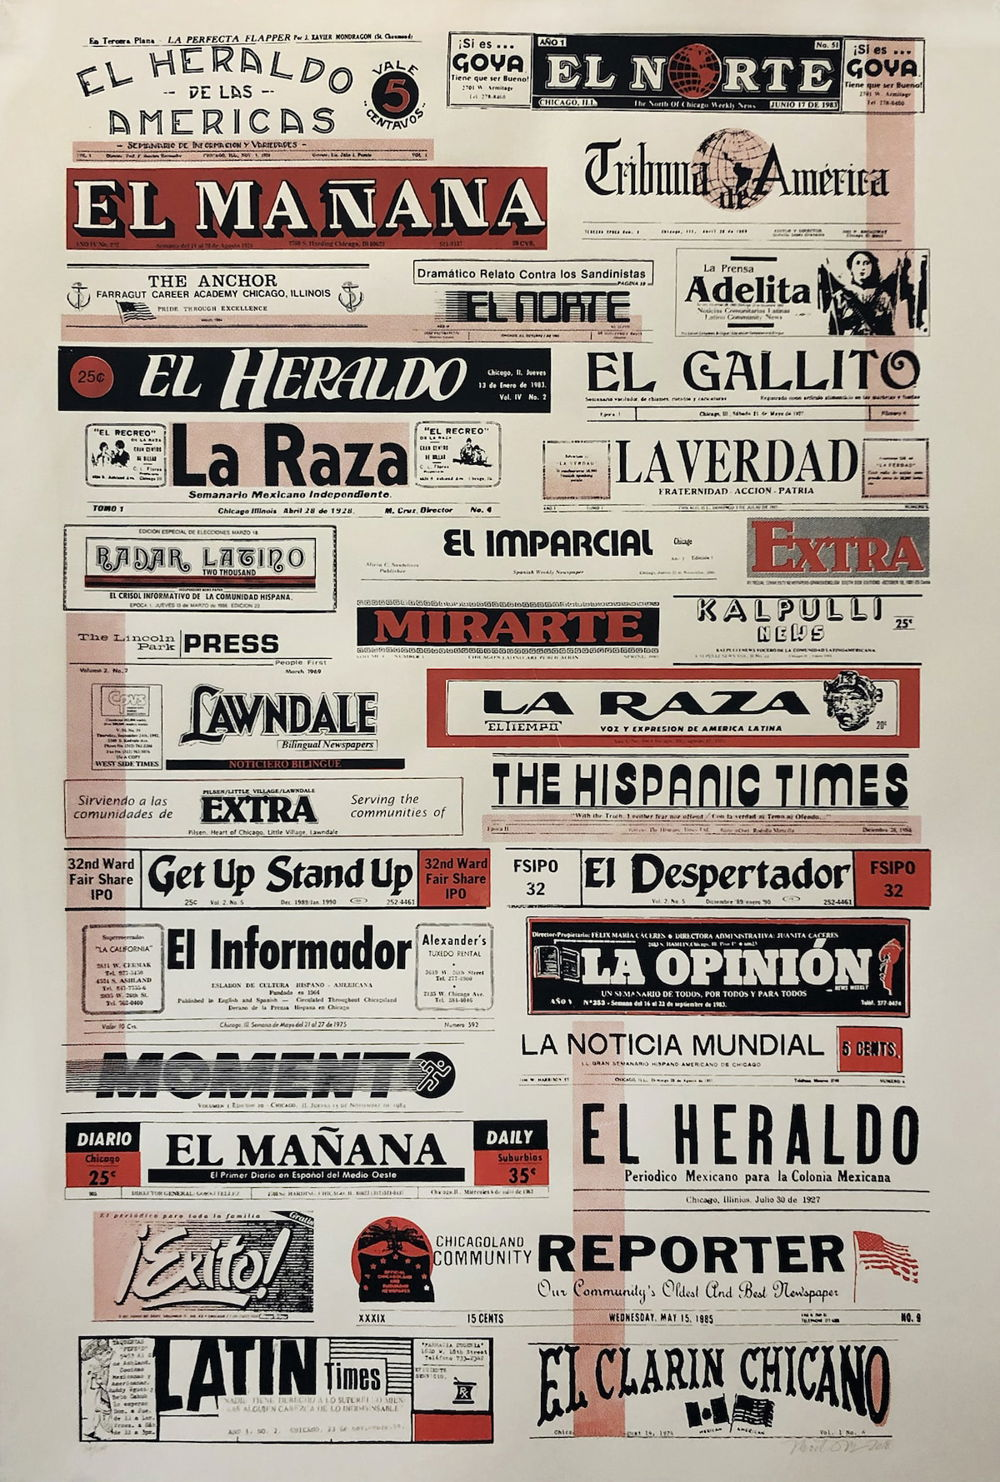 An image of two uneven rows displaying the name plates of various publications such as "La Raza," "El Manana," and "The Hispanic Times." The typography and sizes vary, but all of the letters are printed in black and red on a white background.